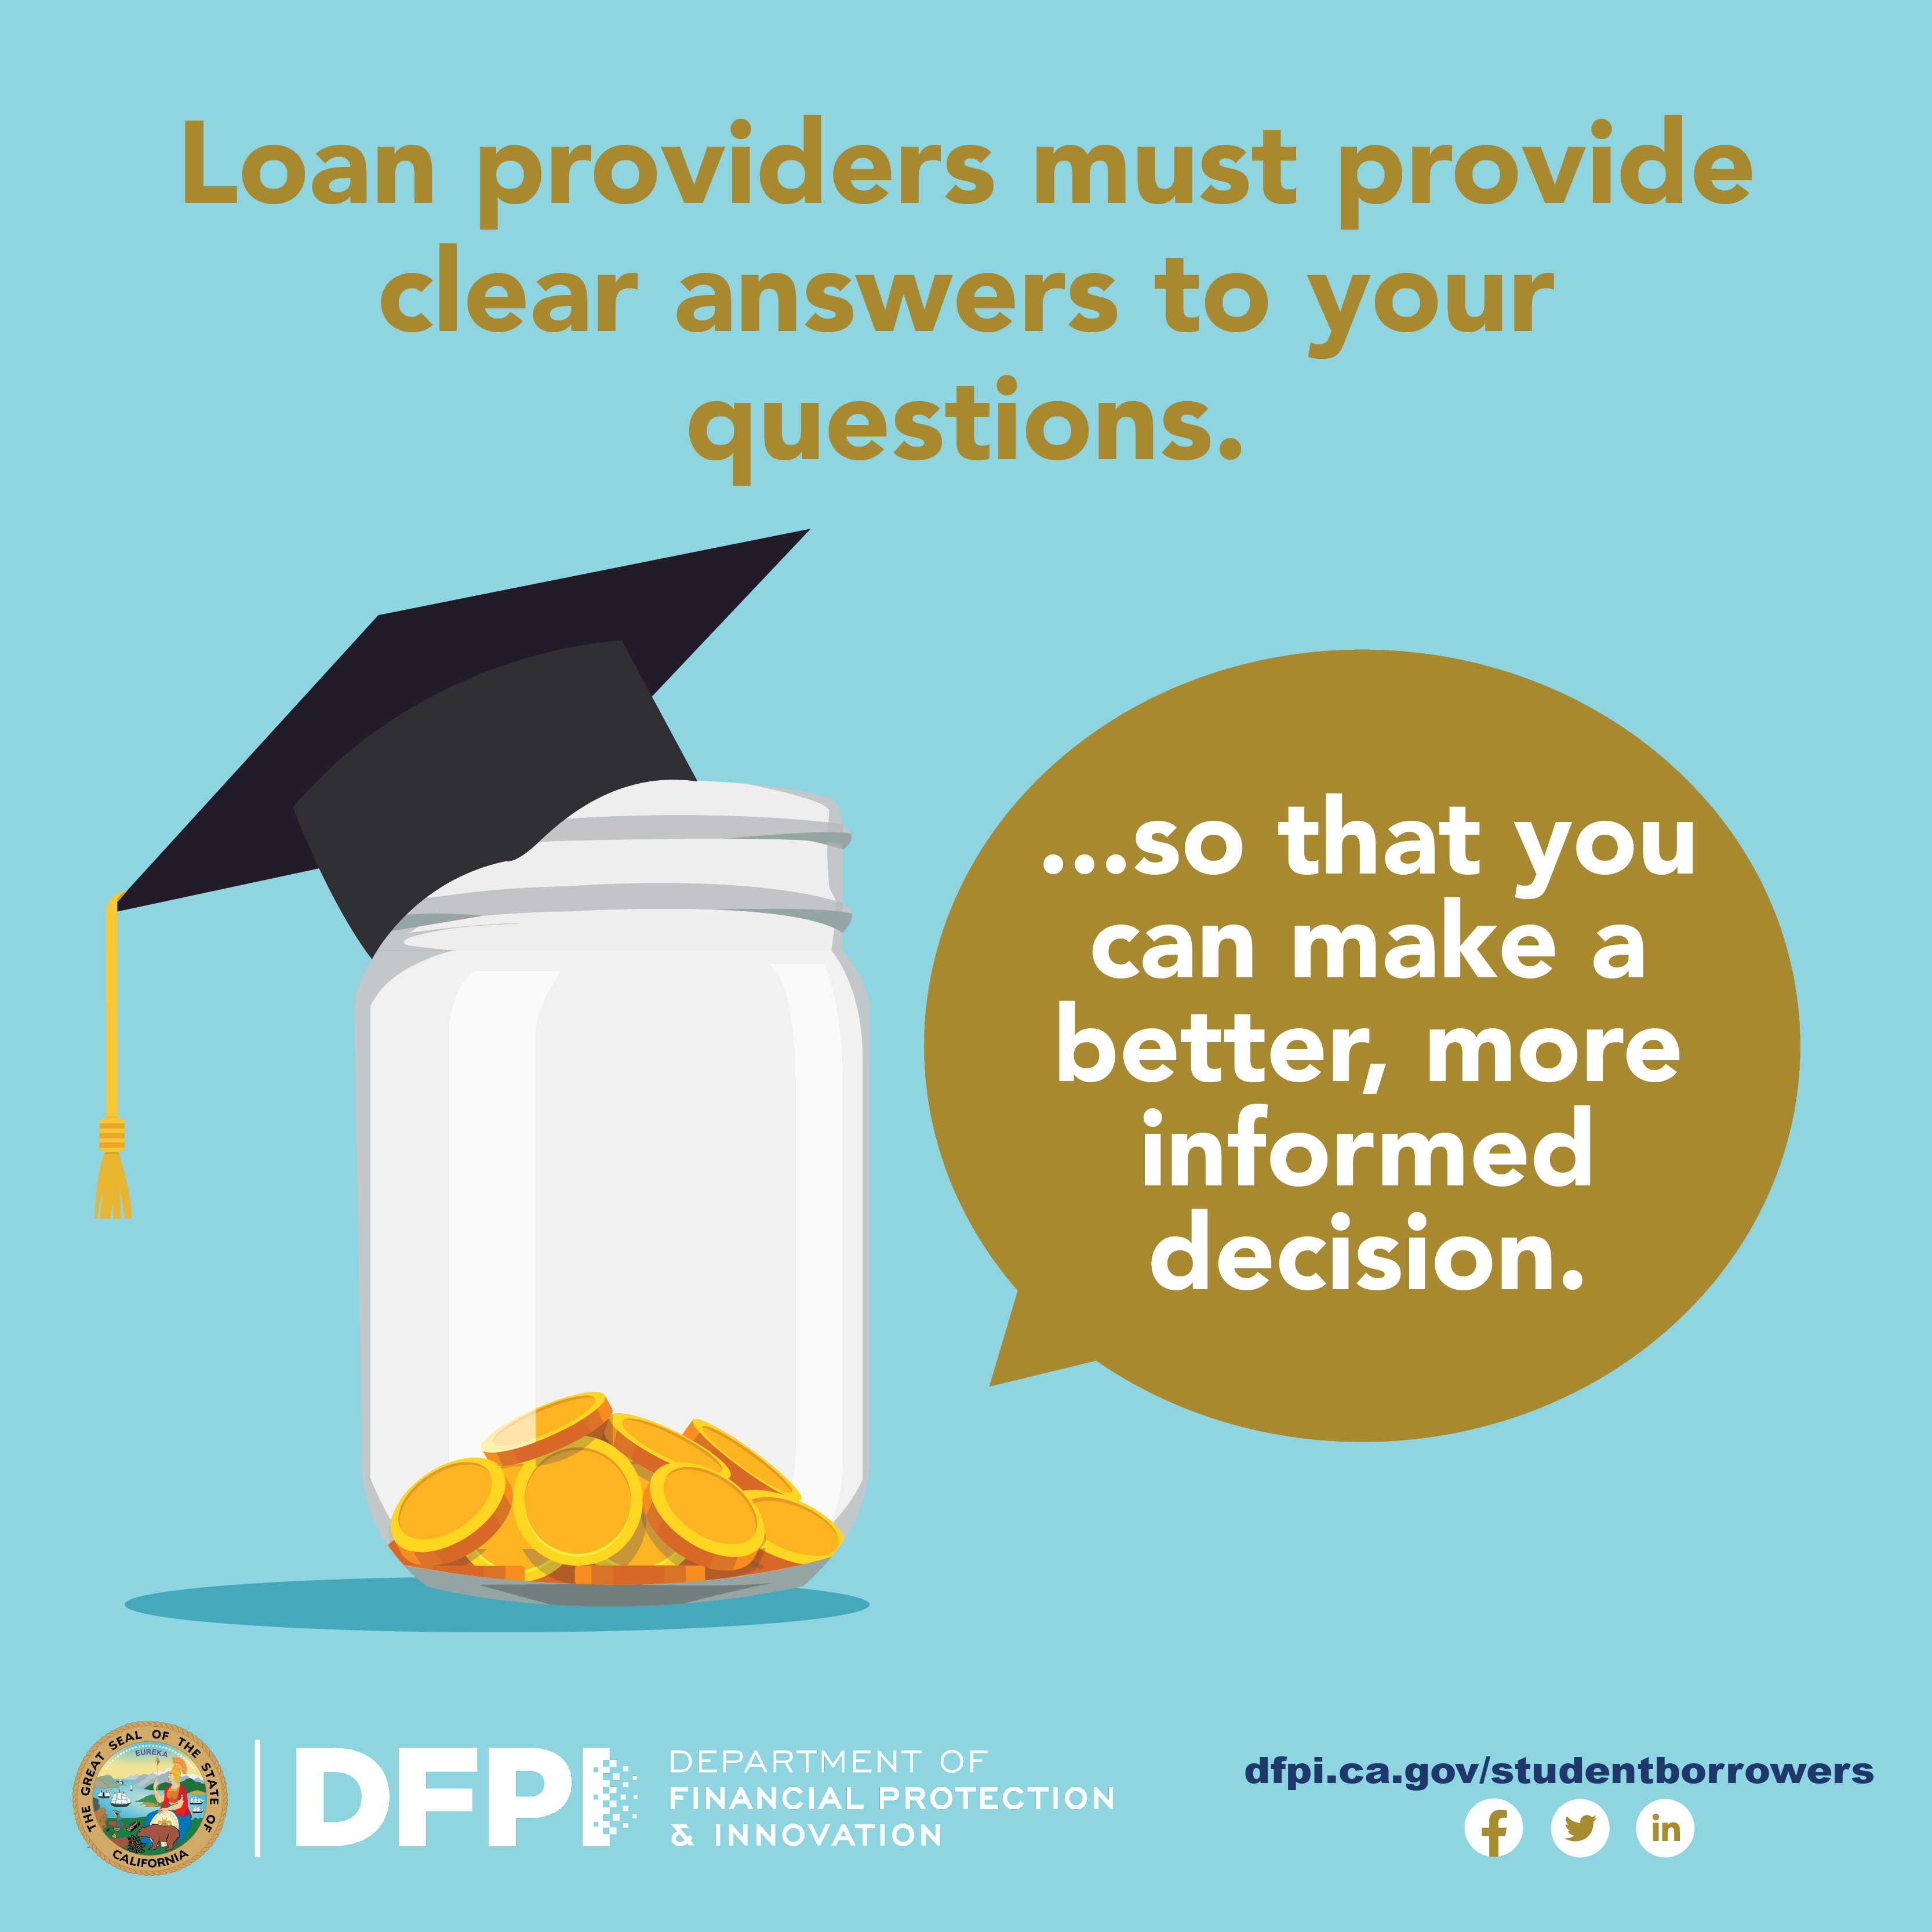 Loan providers must provide clear answers to your questions